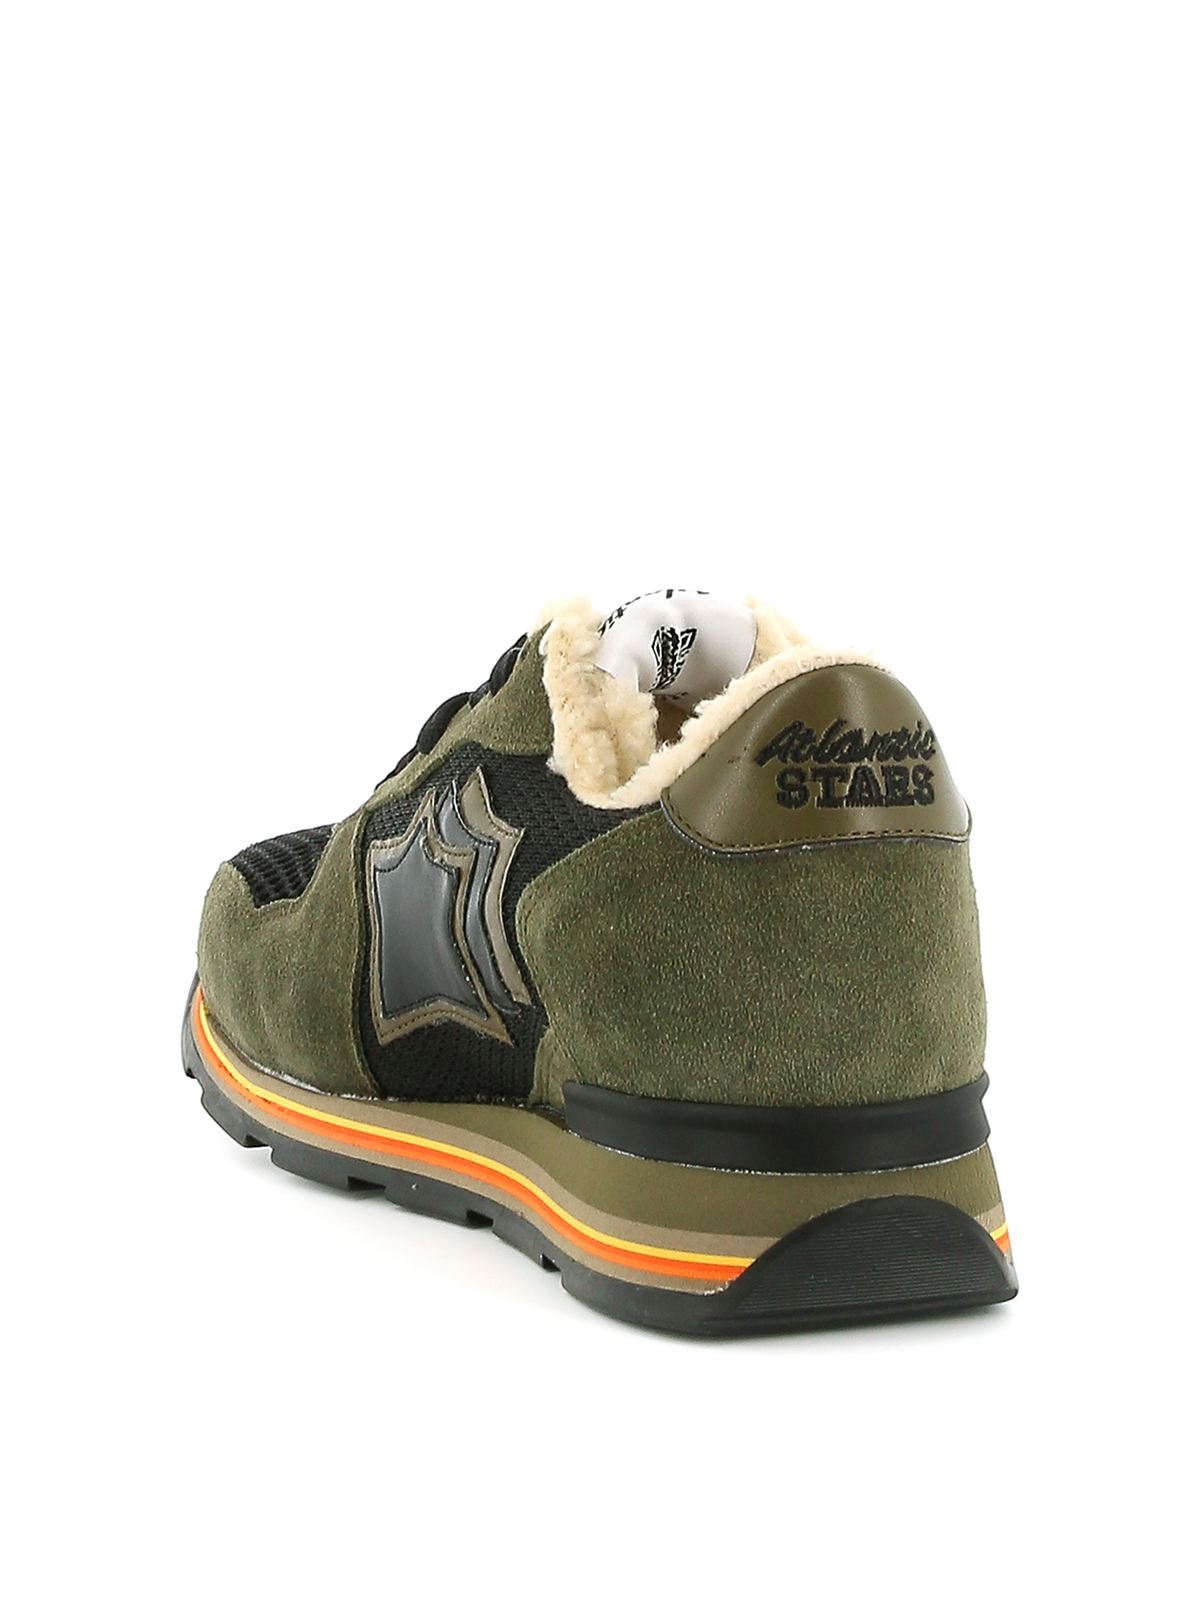 sneakers with fur inside